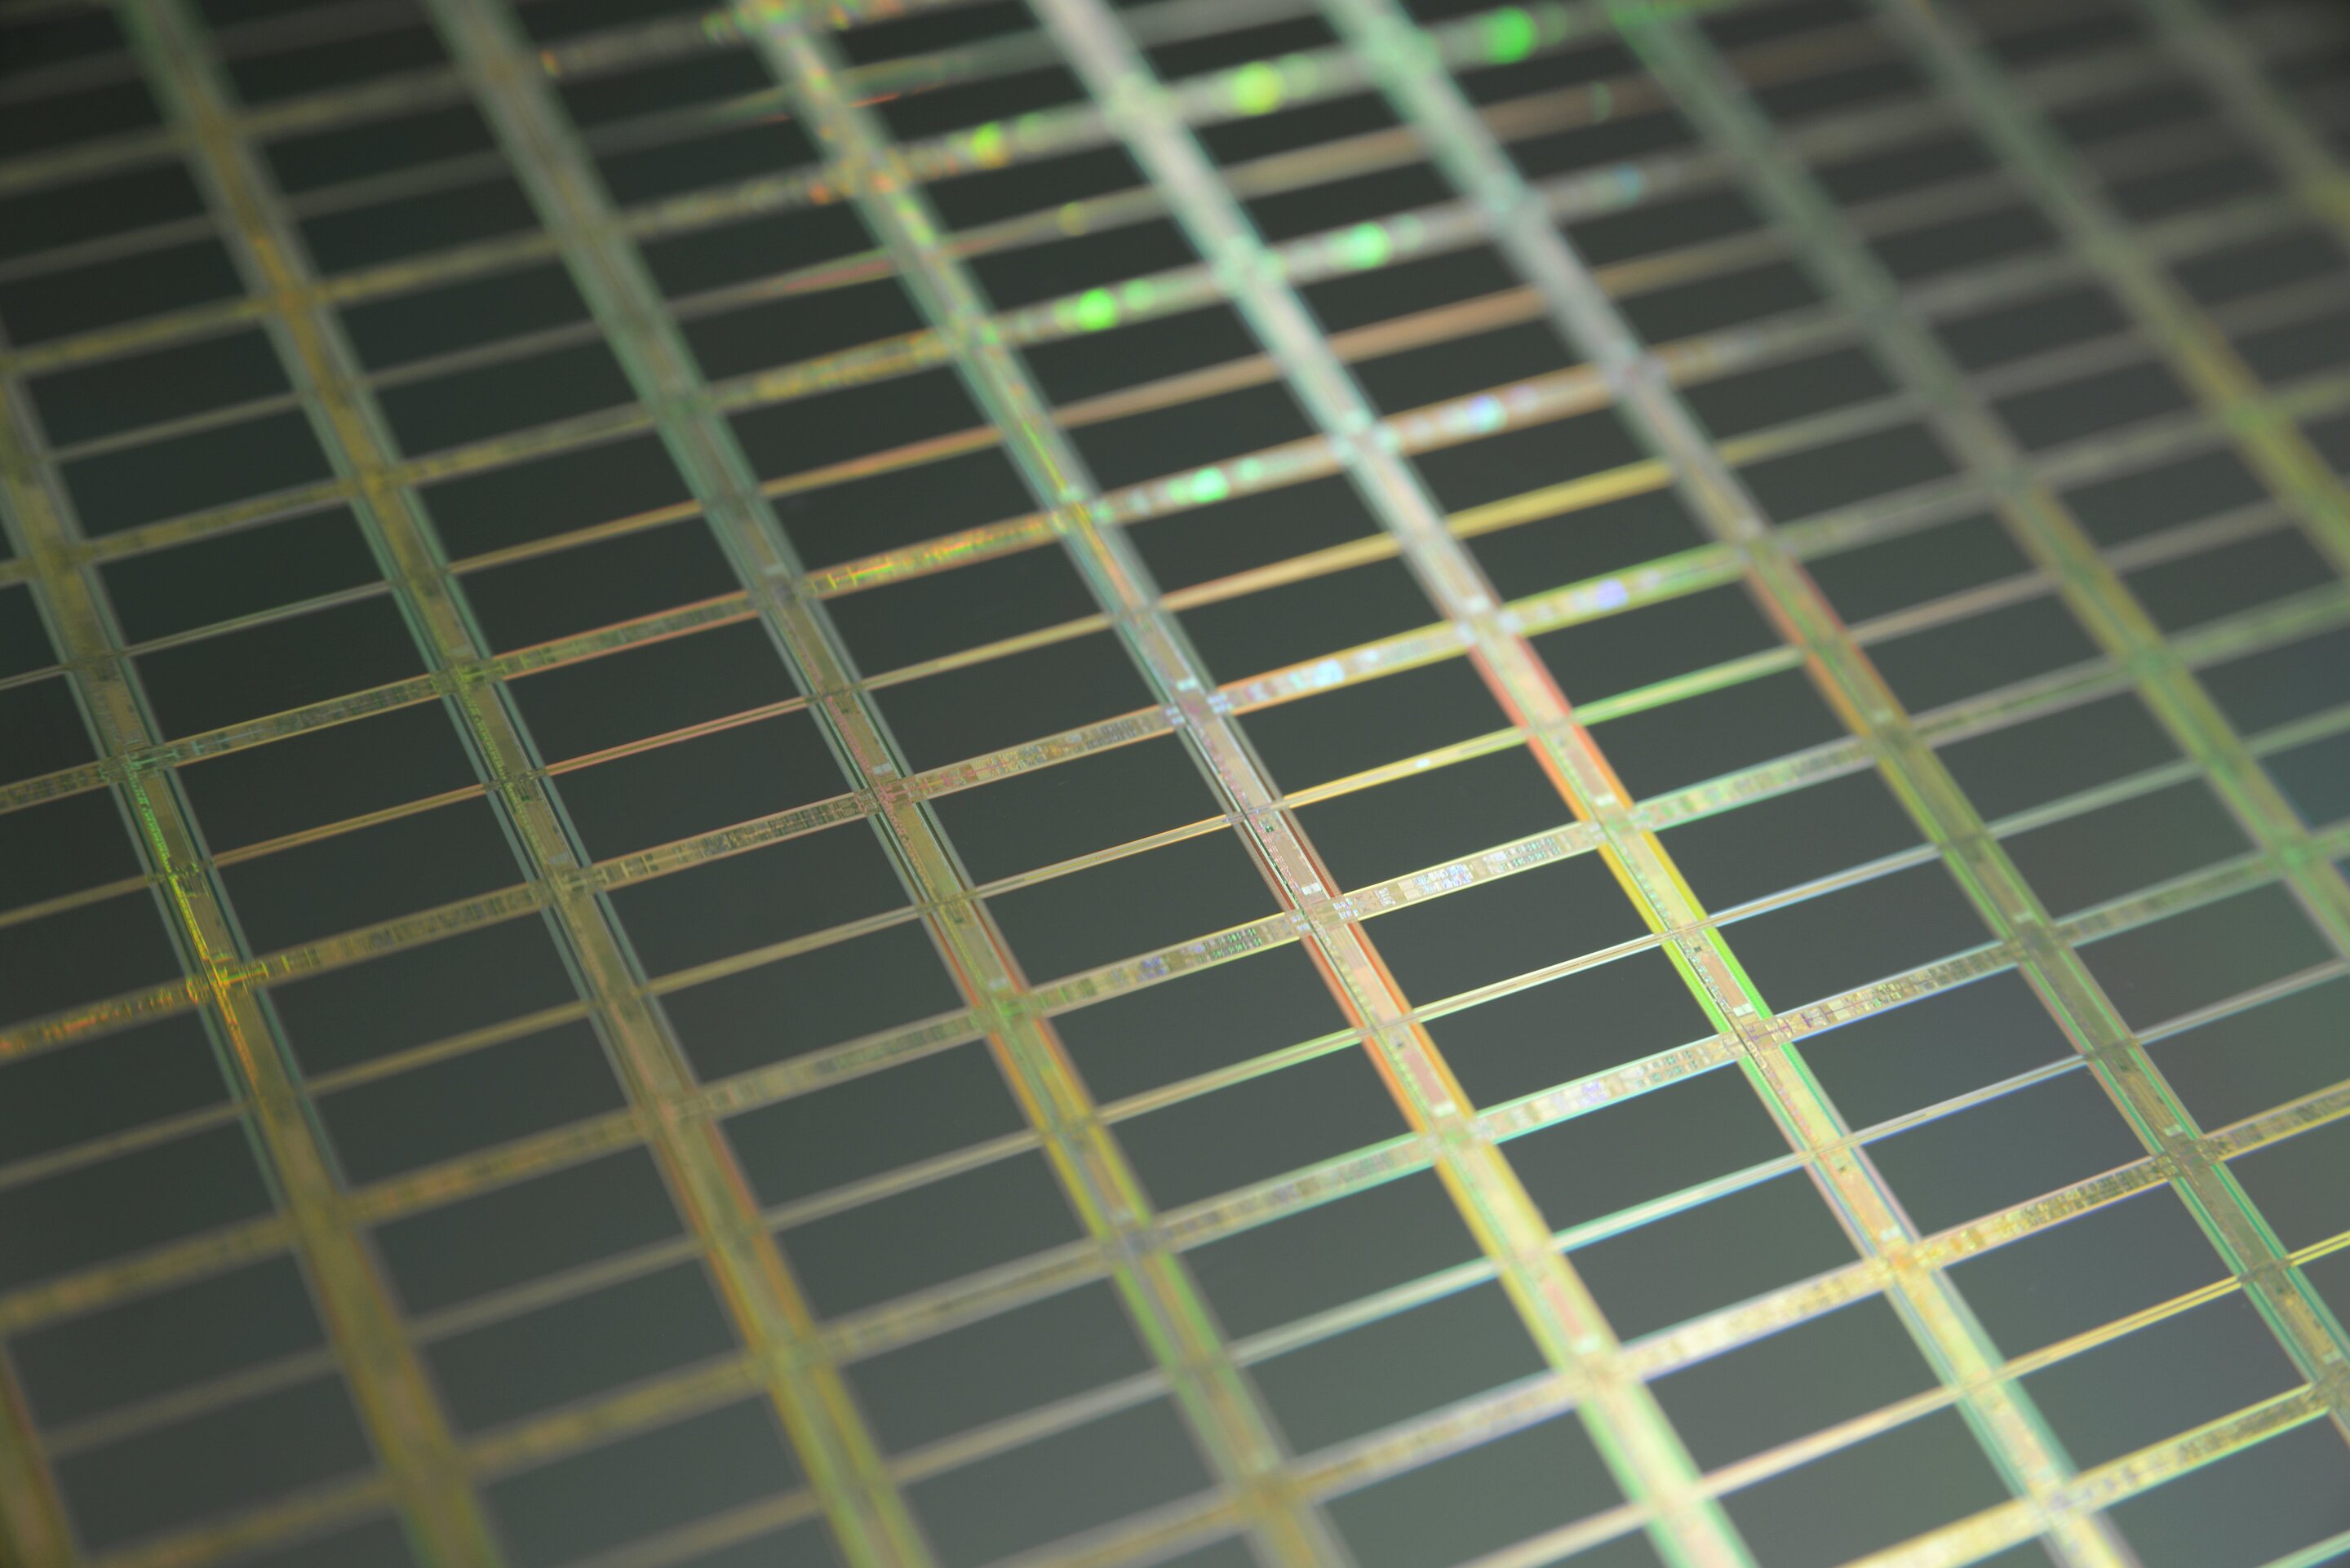 Reappraisal of Moore's law through chip density